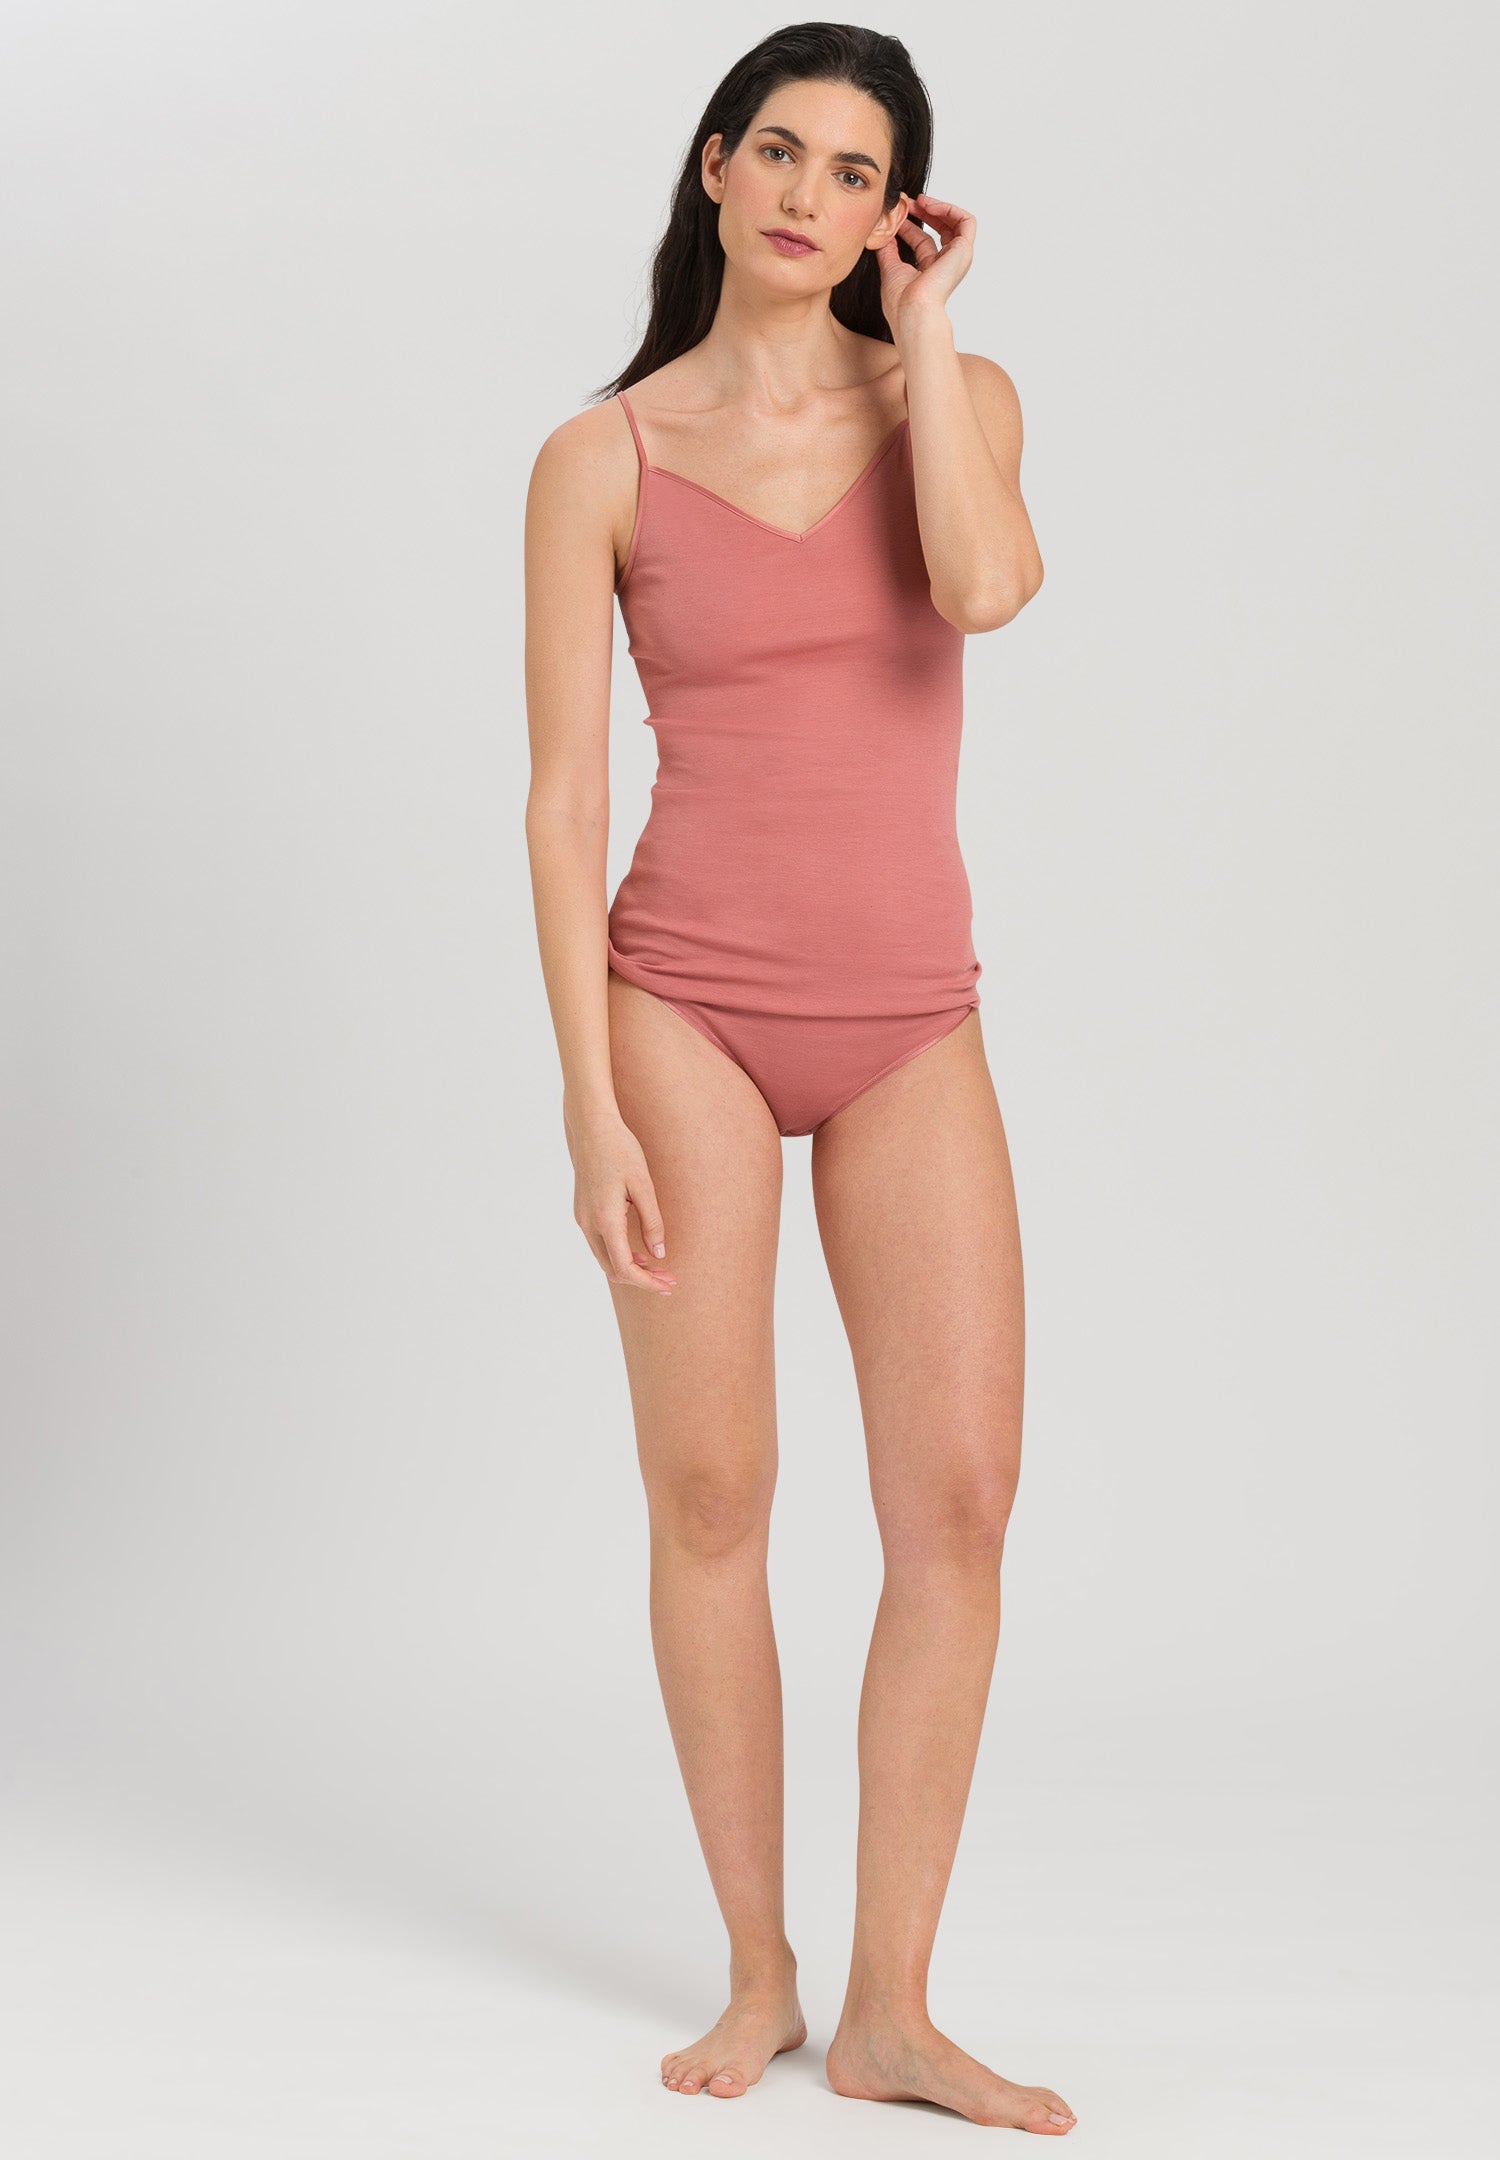 71601 Cotton Seamless V-Neck Camisole - 2408 Sweet Pepper